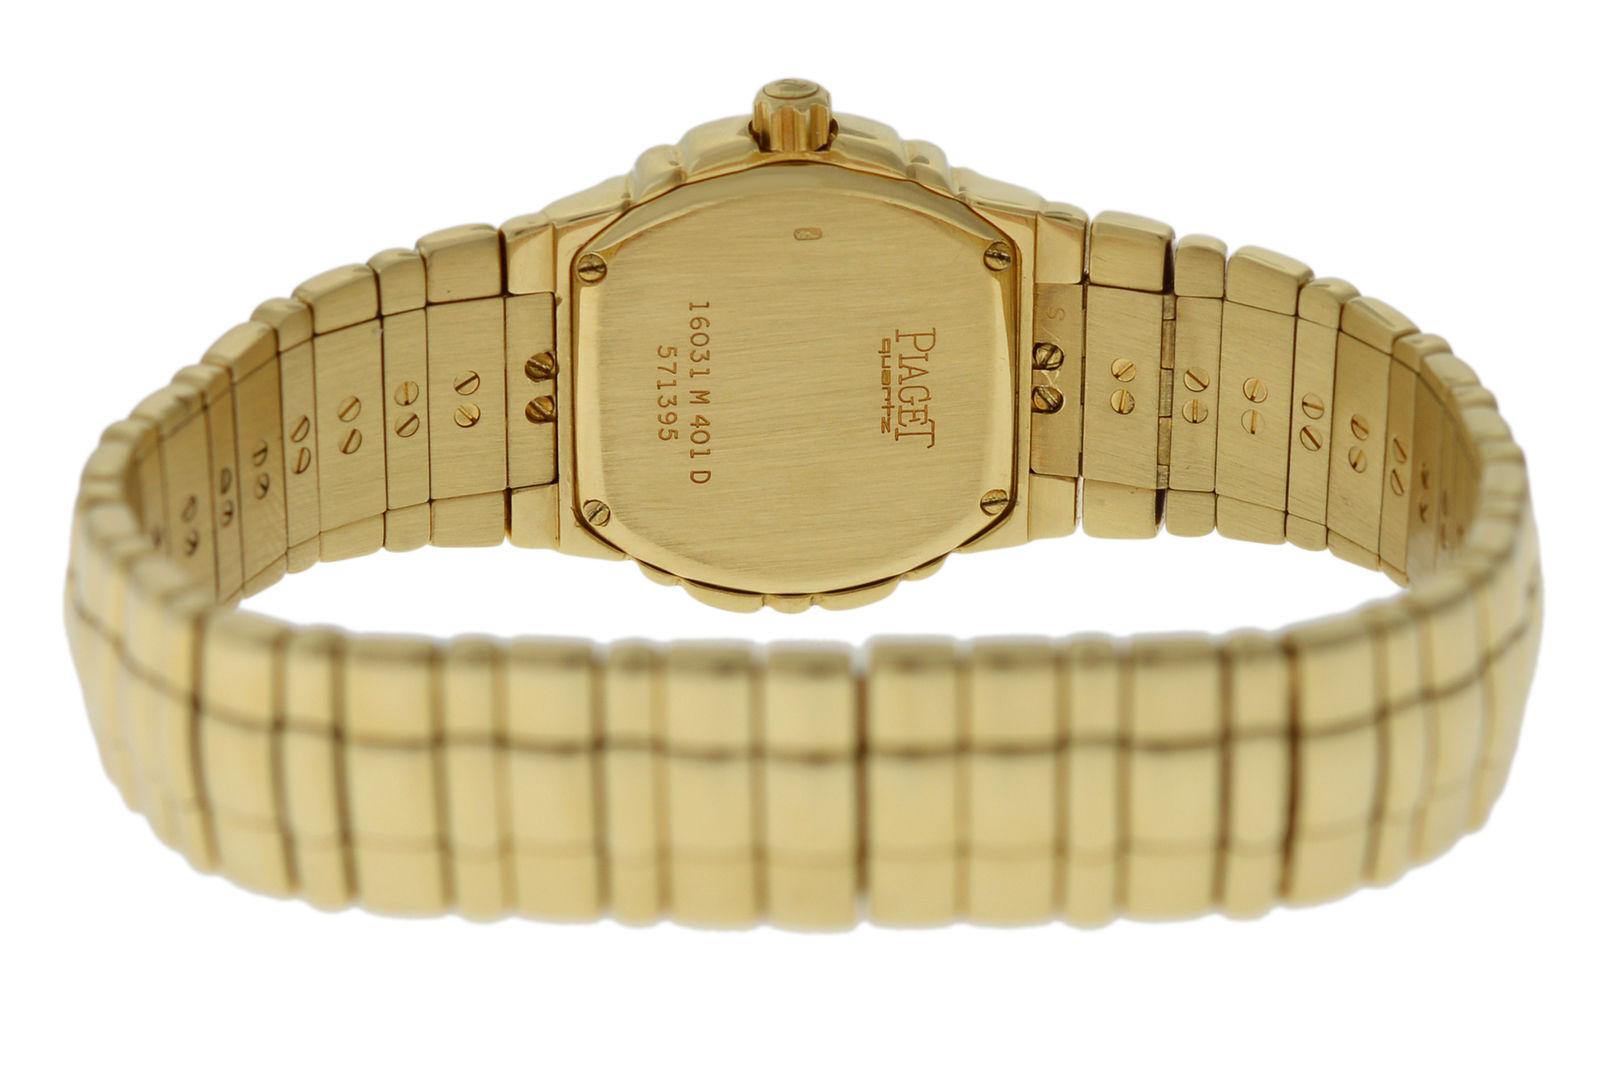 Ladies Piaget Tanagra 18 Karat Yellow Gold Diamond Quartz Watch In Excellent Condition For Sale In New York, NY